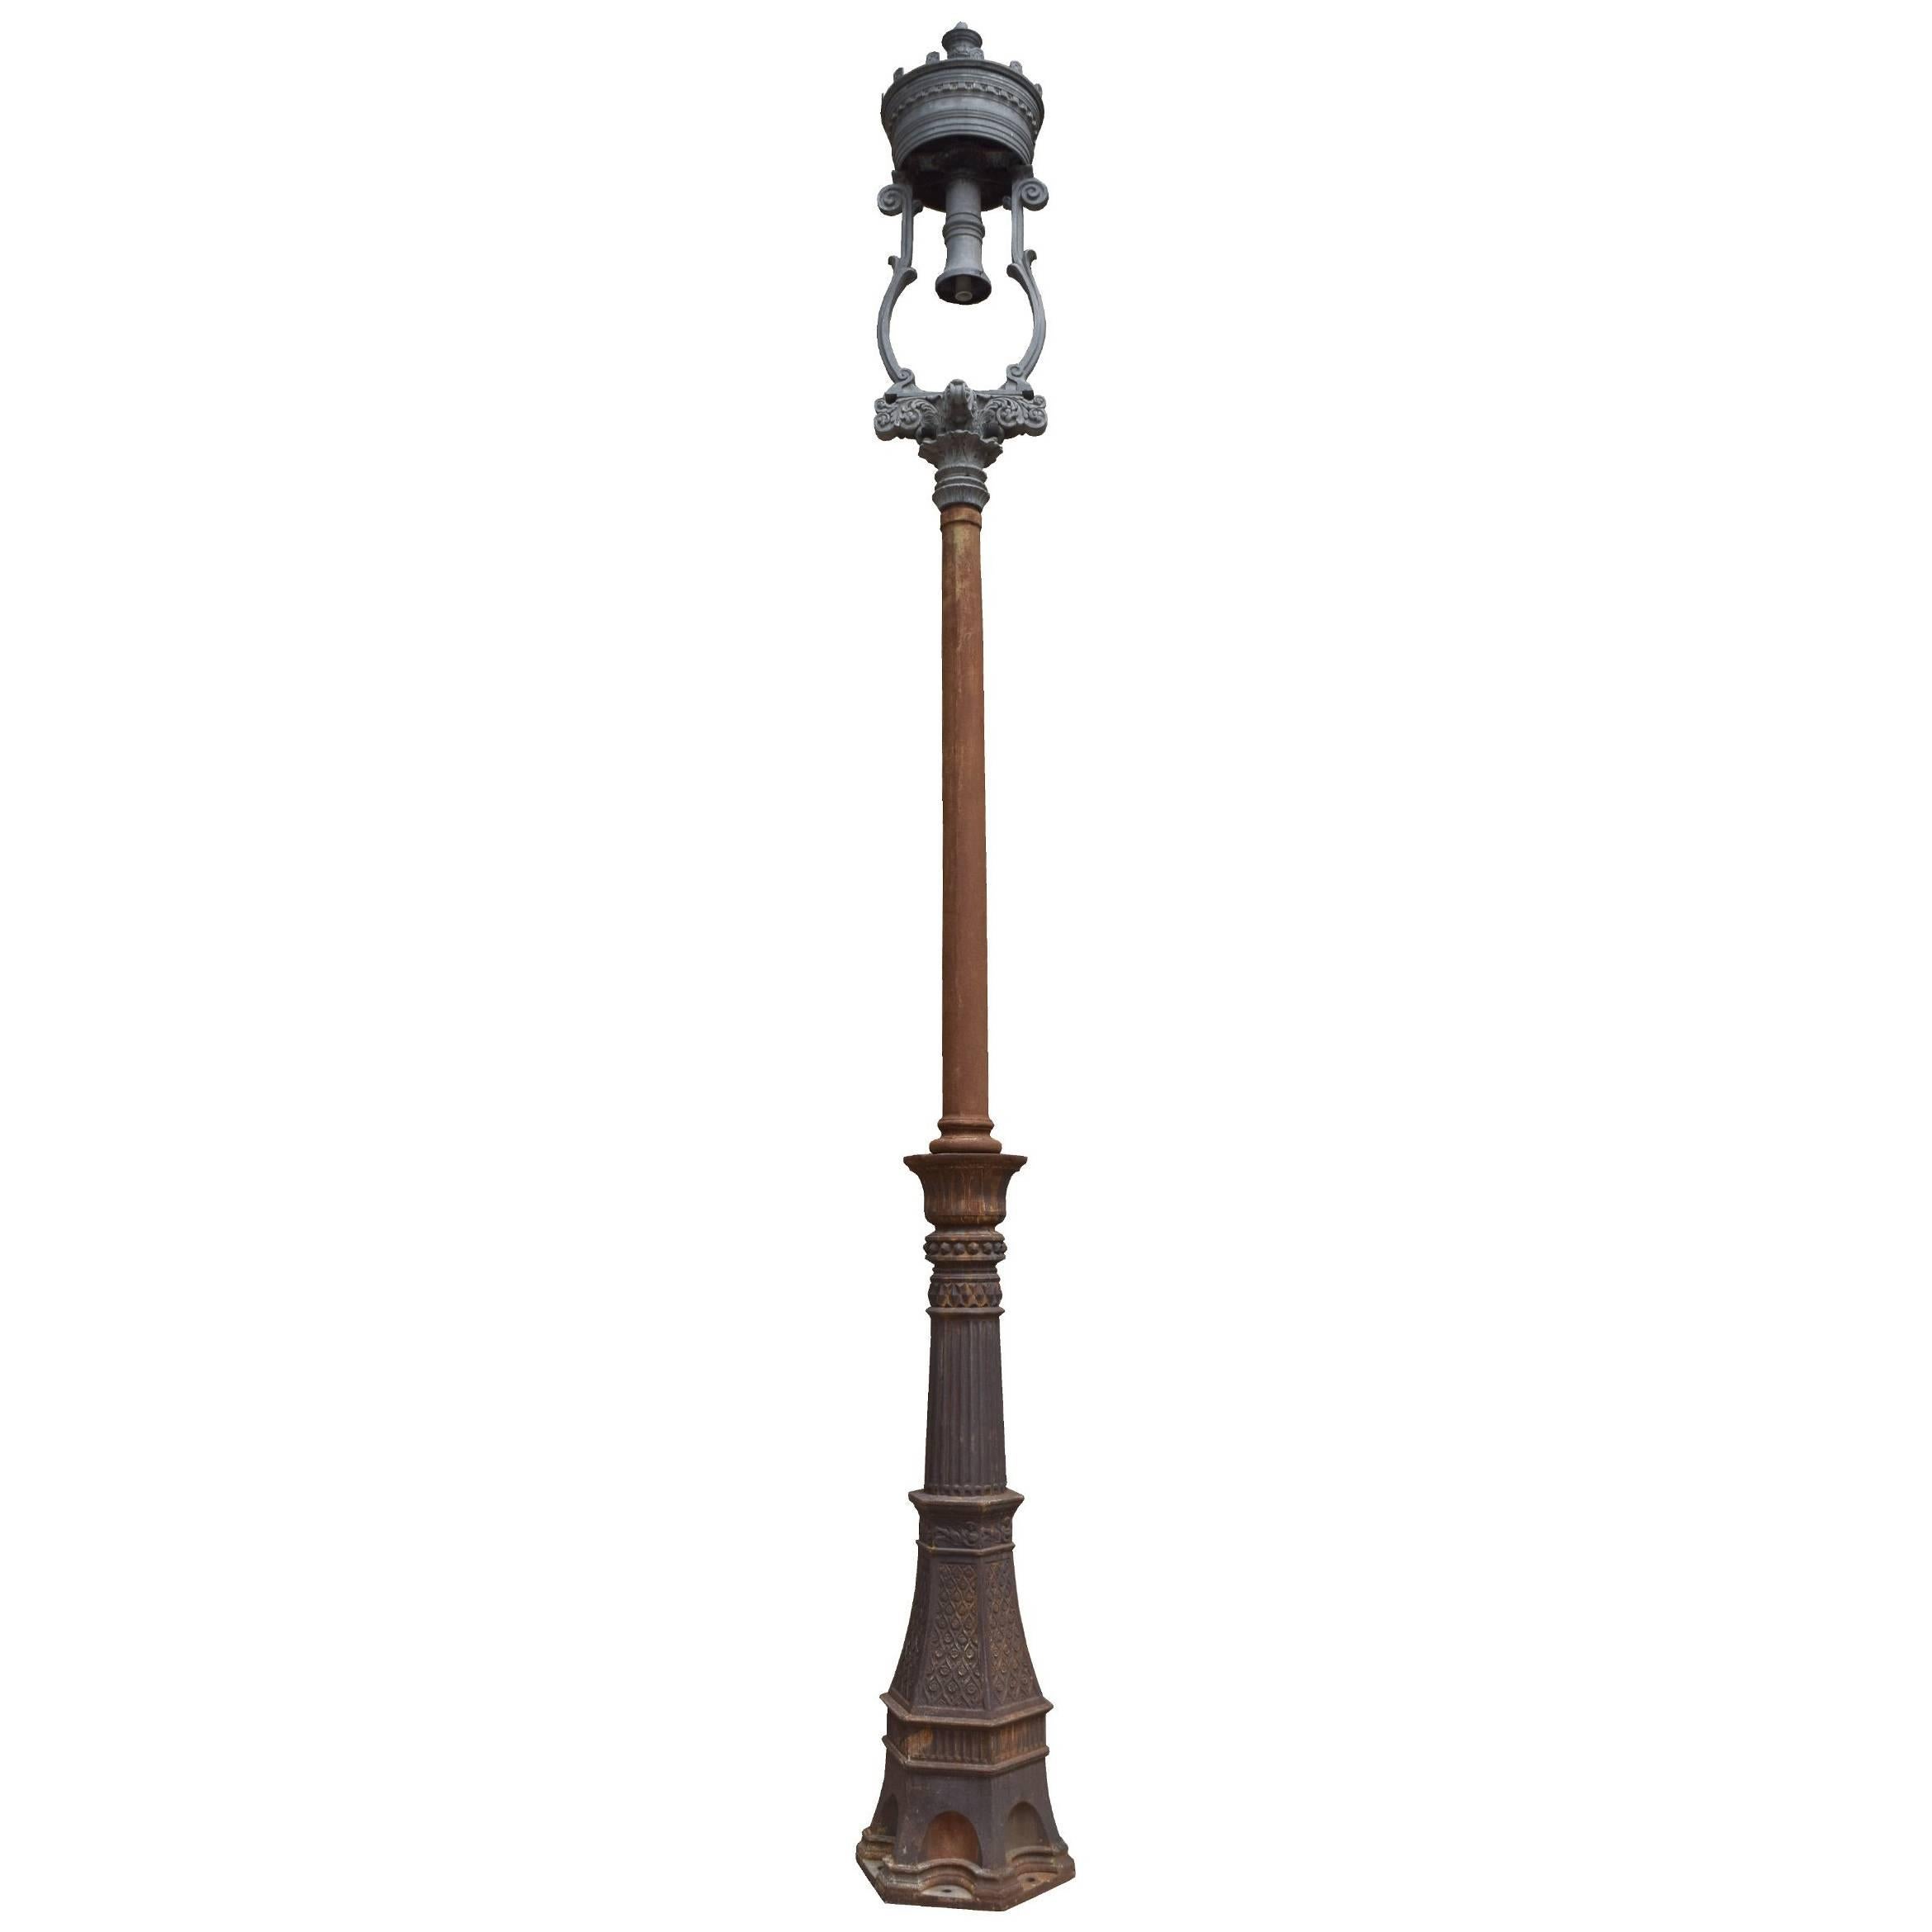 Original Lamp Post from the World's Columbian Exposition, 1893